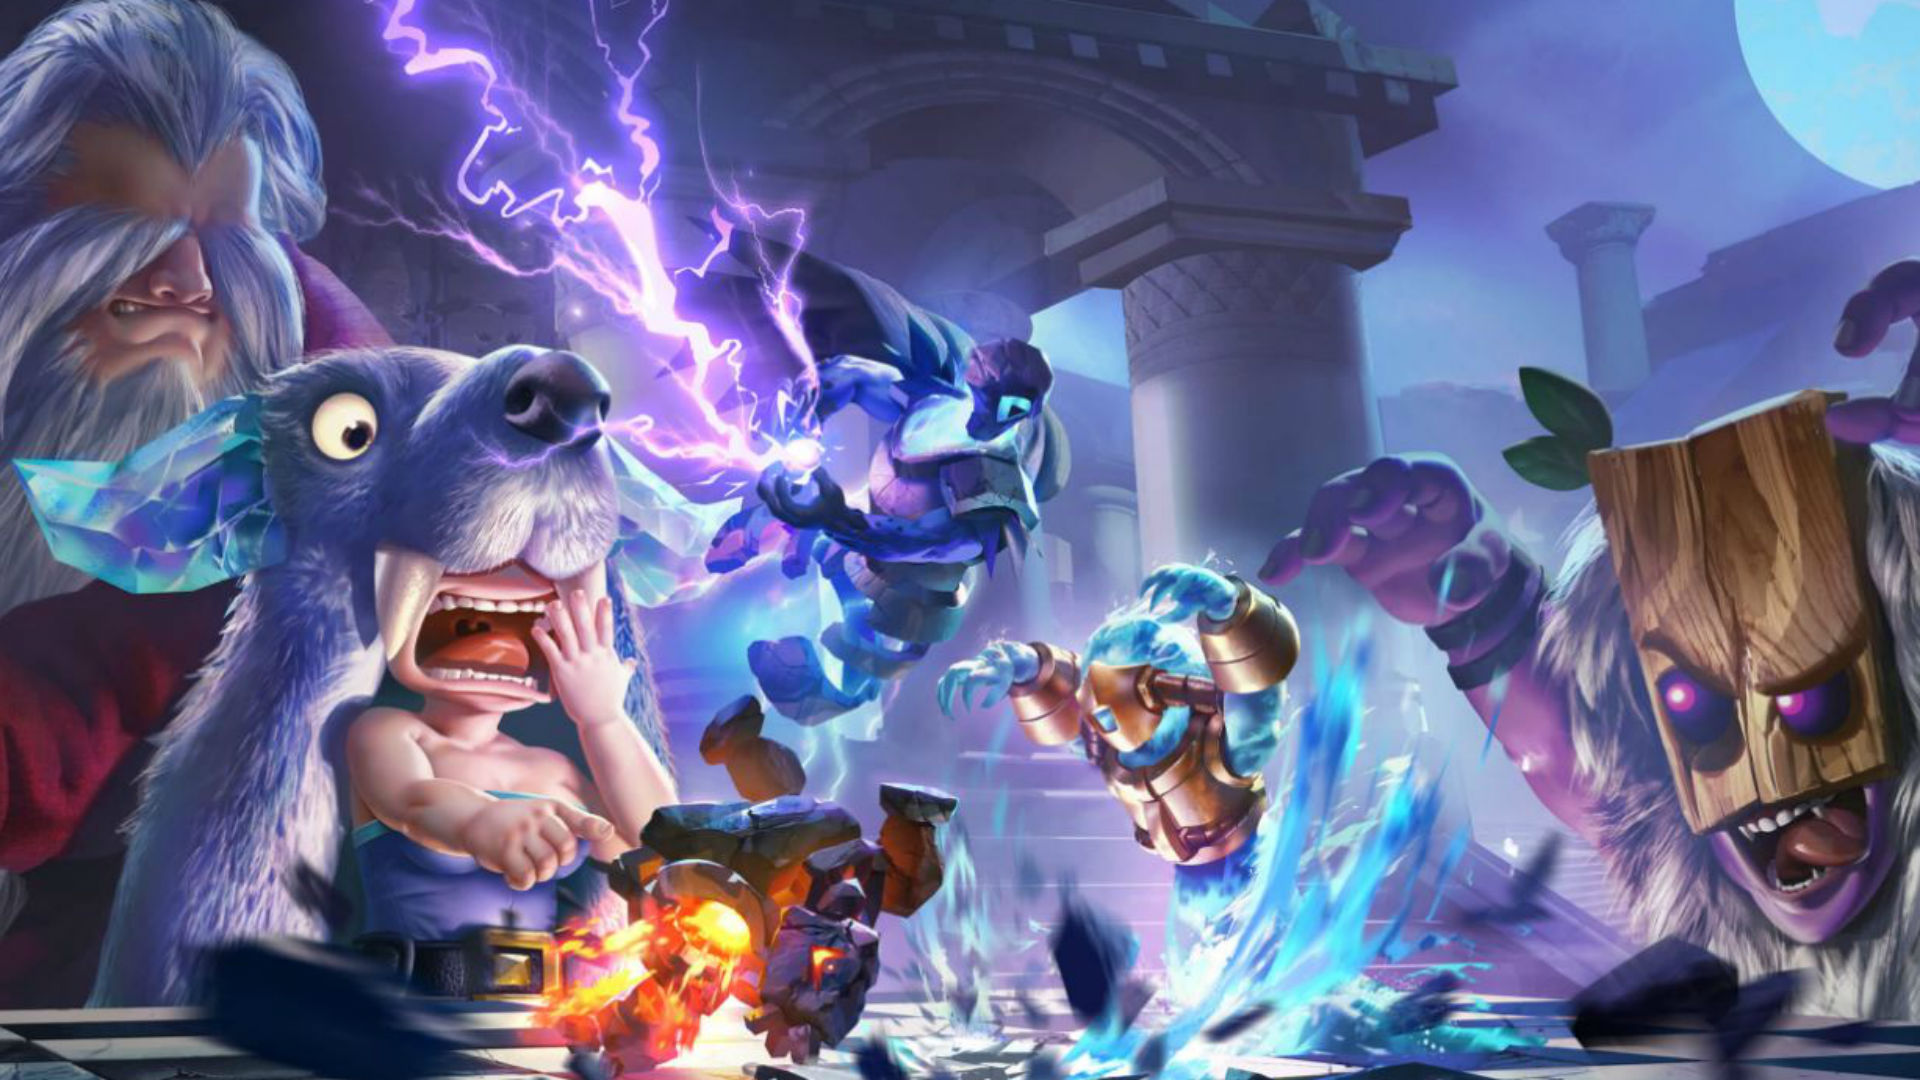 Auto Chess Legends: Tactical Teamfight Mod apk download - Auto Chess  Legends: Tactical Teamfight MOD apk 0.18.0 free for Android.